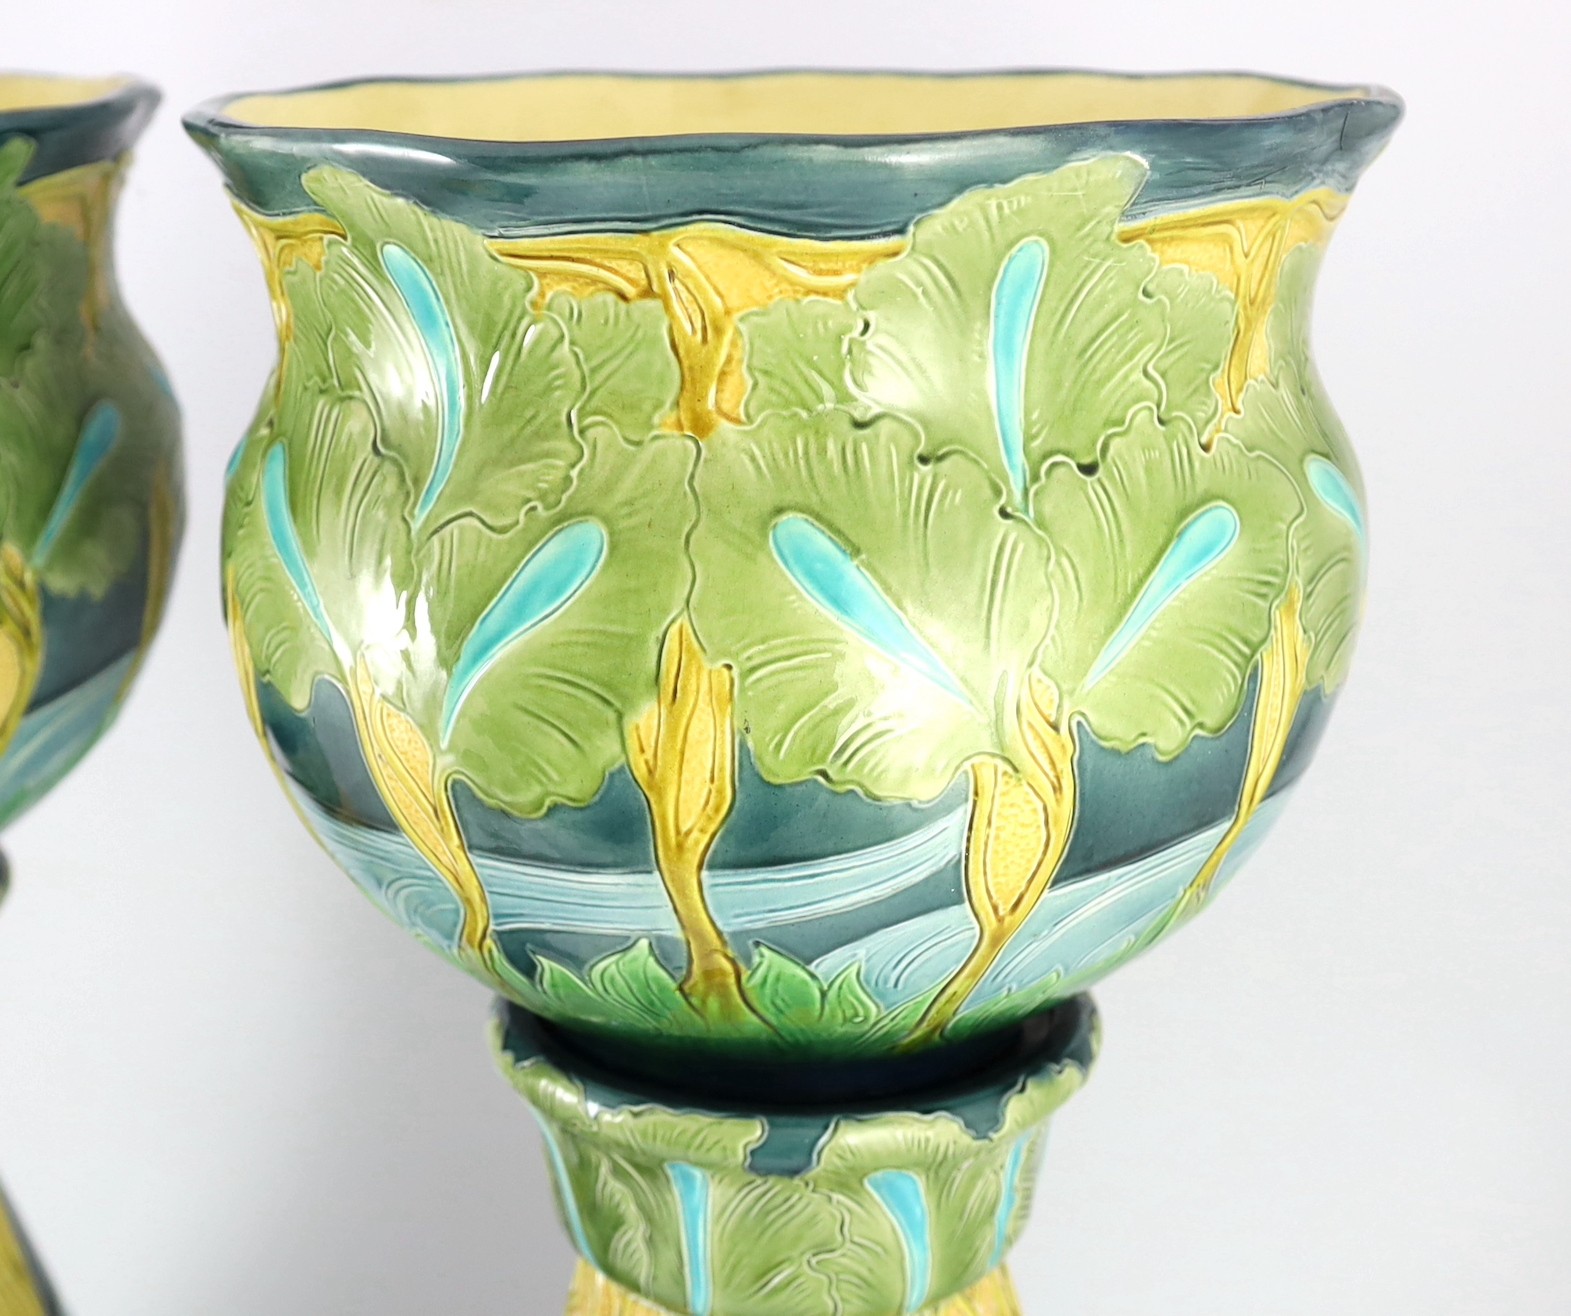 A pair of Burmantofts Art Nouveau faience jardinieres on matching pedestals, c.1900, impressed marks - Image 14 of 14